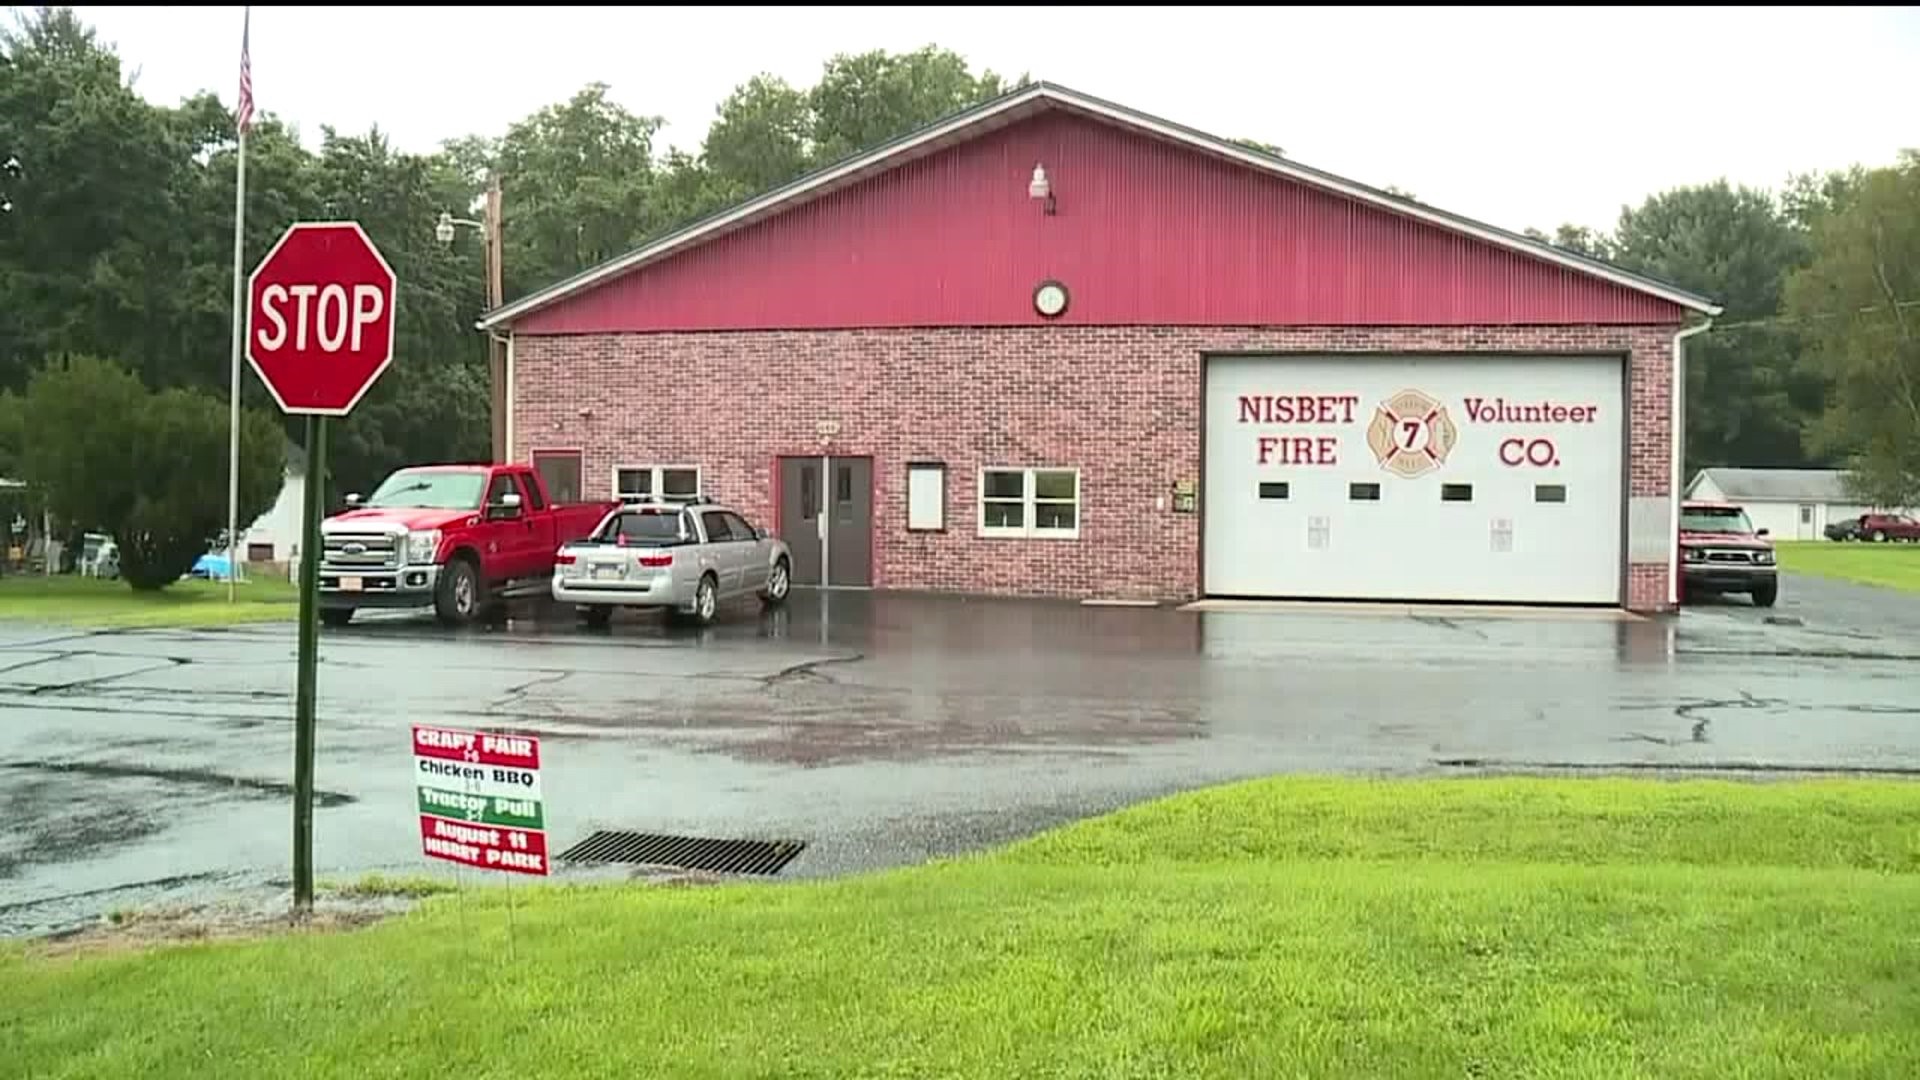 Fire Company in Lycoming County Flooded Out